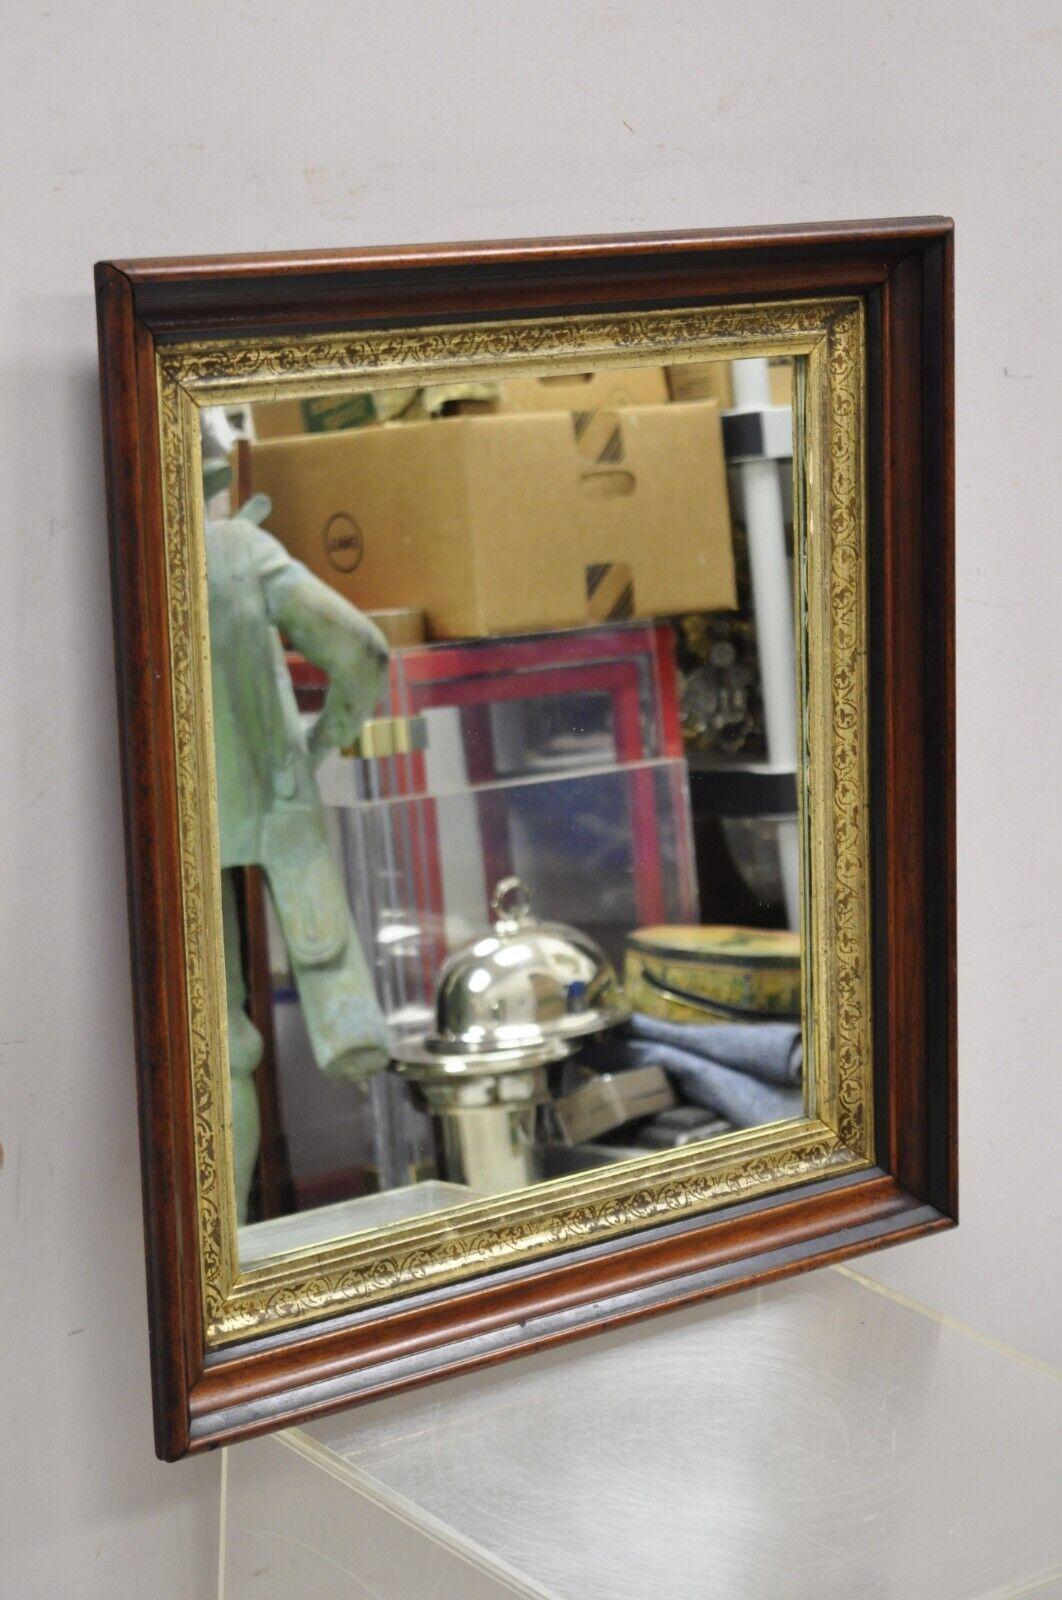 Antique Victorian aesthetic deep shadow box mahogany frame wall mirror 24 x 22.5. Item features gold gilt details. Solid wood frame, beautiful woodgrain, very nice antique item, quality American craftsmanship, circa 19th century. Measurements: 24